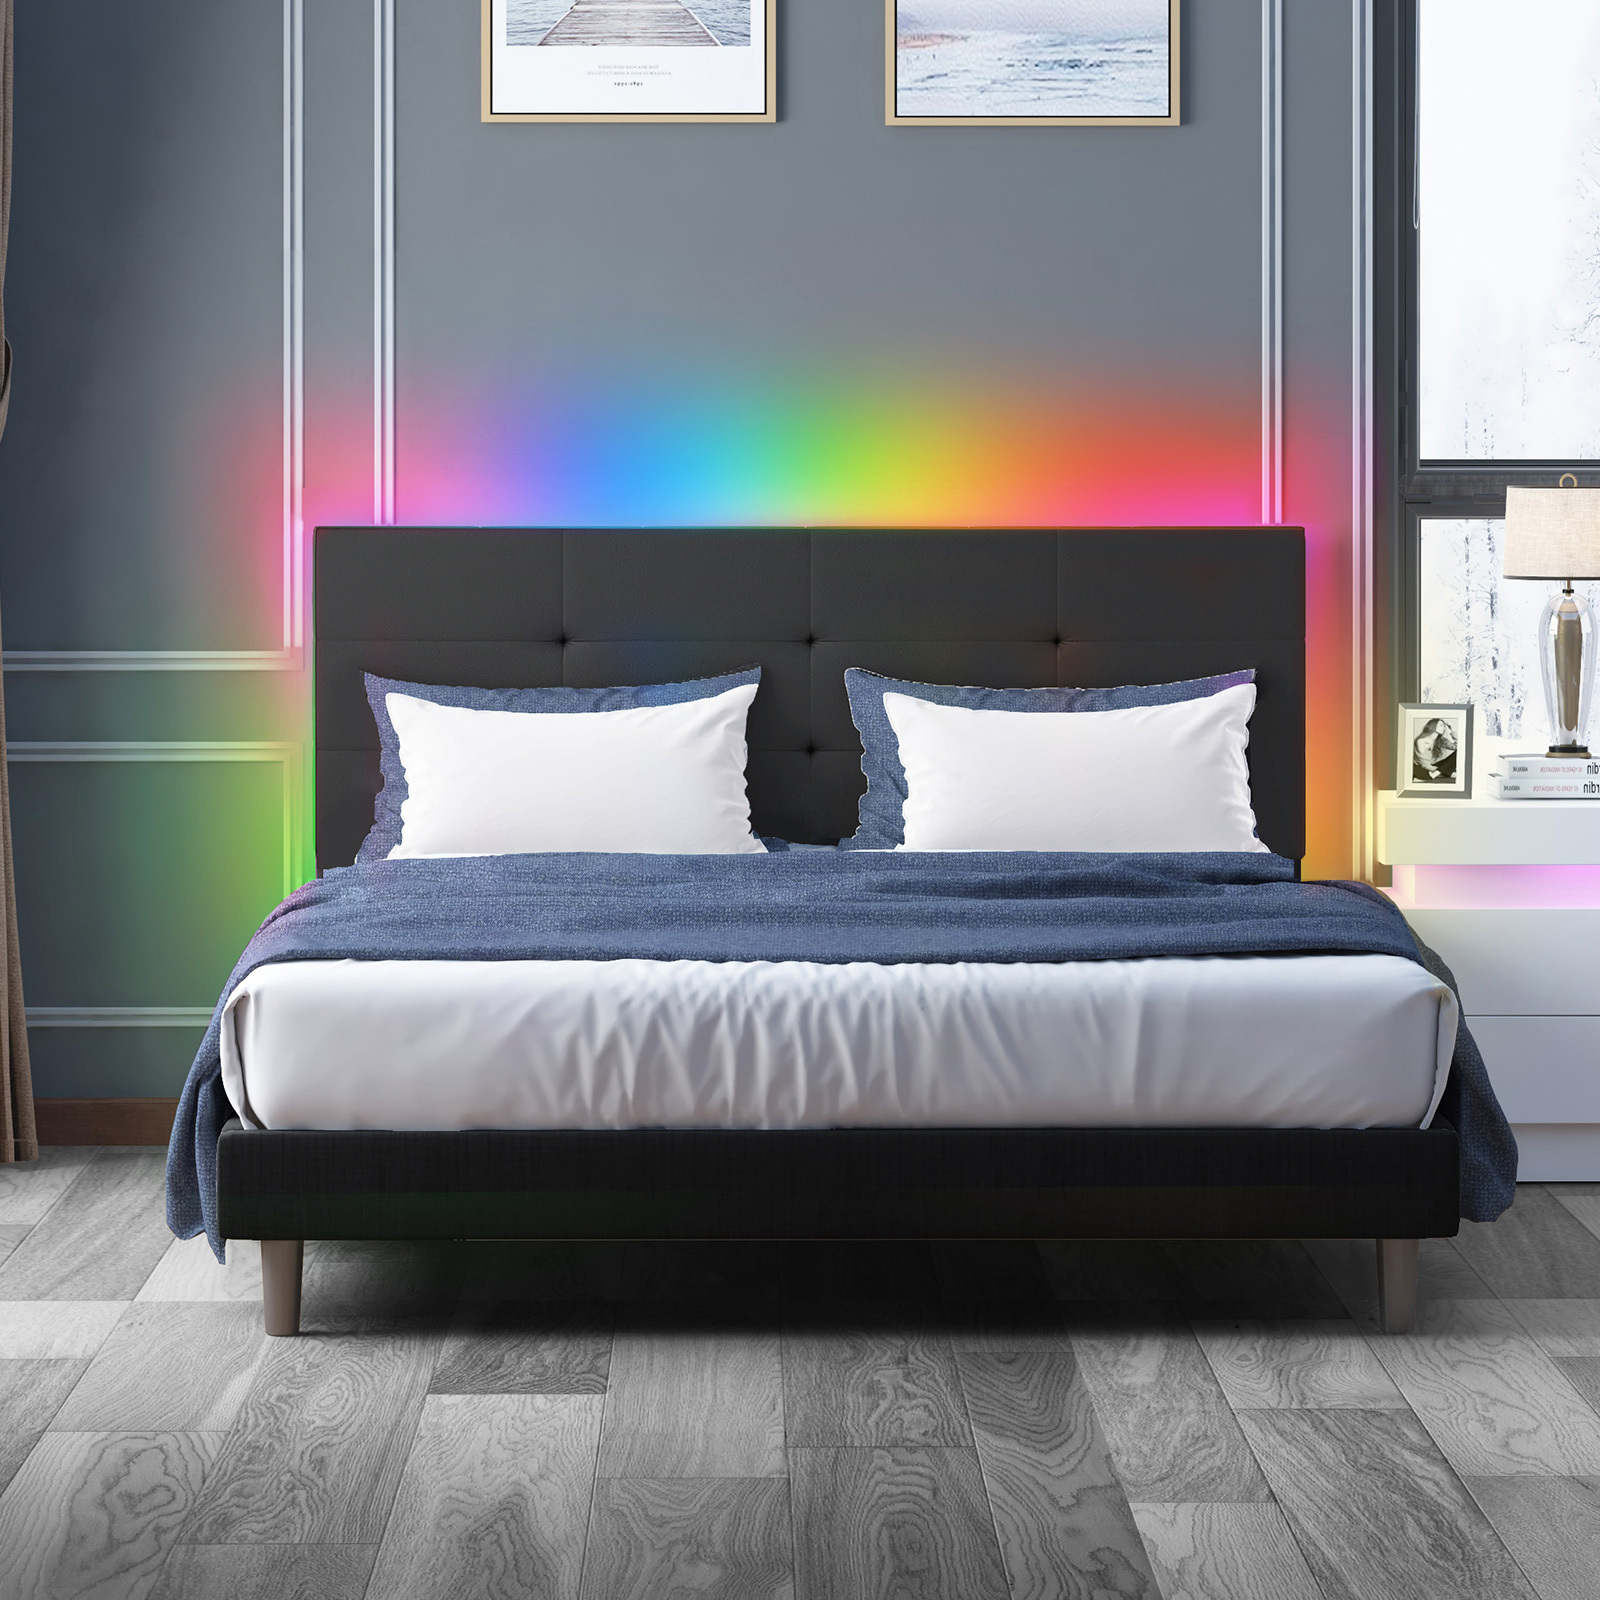 Mjkone Full Size Beds with LED Headboard, RGB LED Light Controlled by Alexa or APP, Fabric Upholstered Platform//Easy Box Spring Black) - Walmart.com